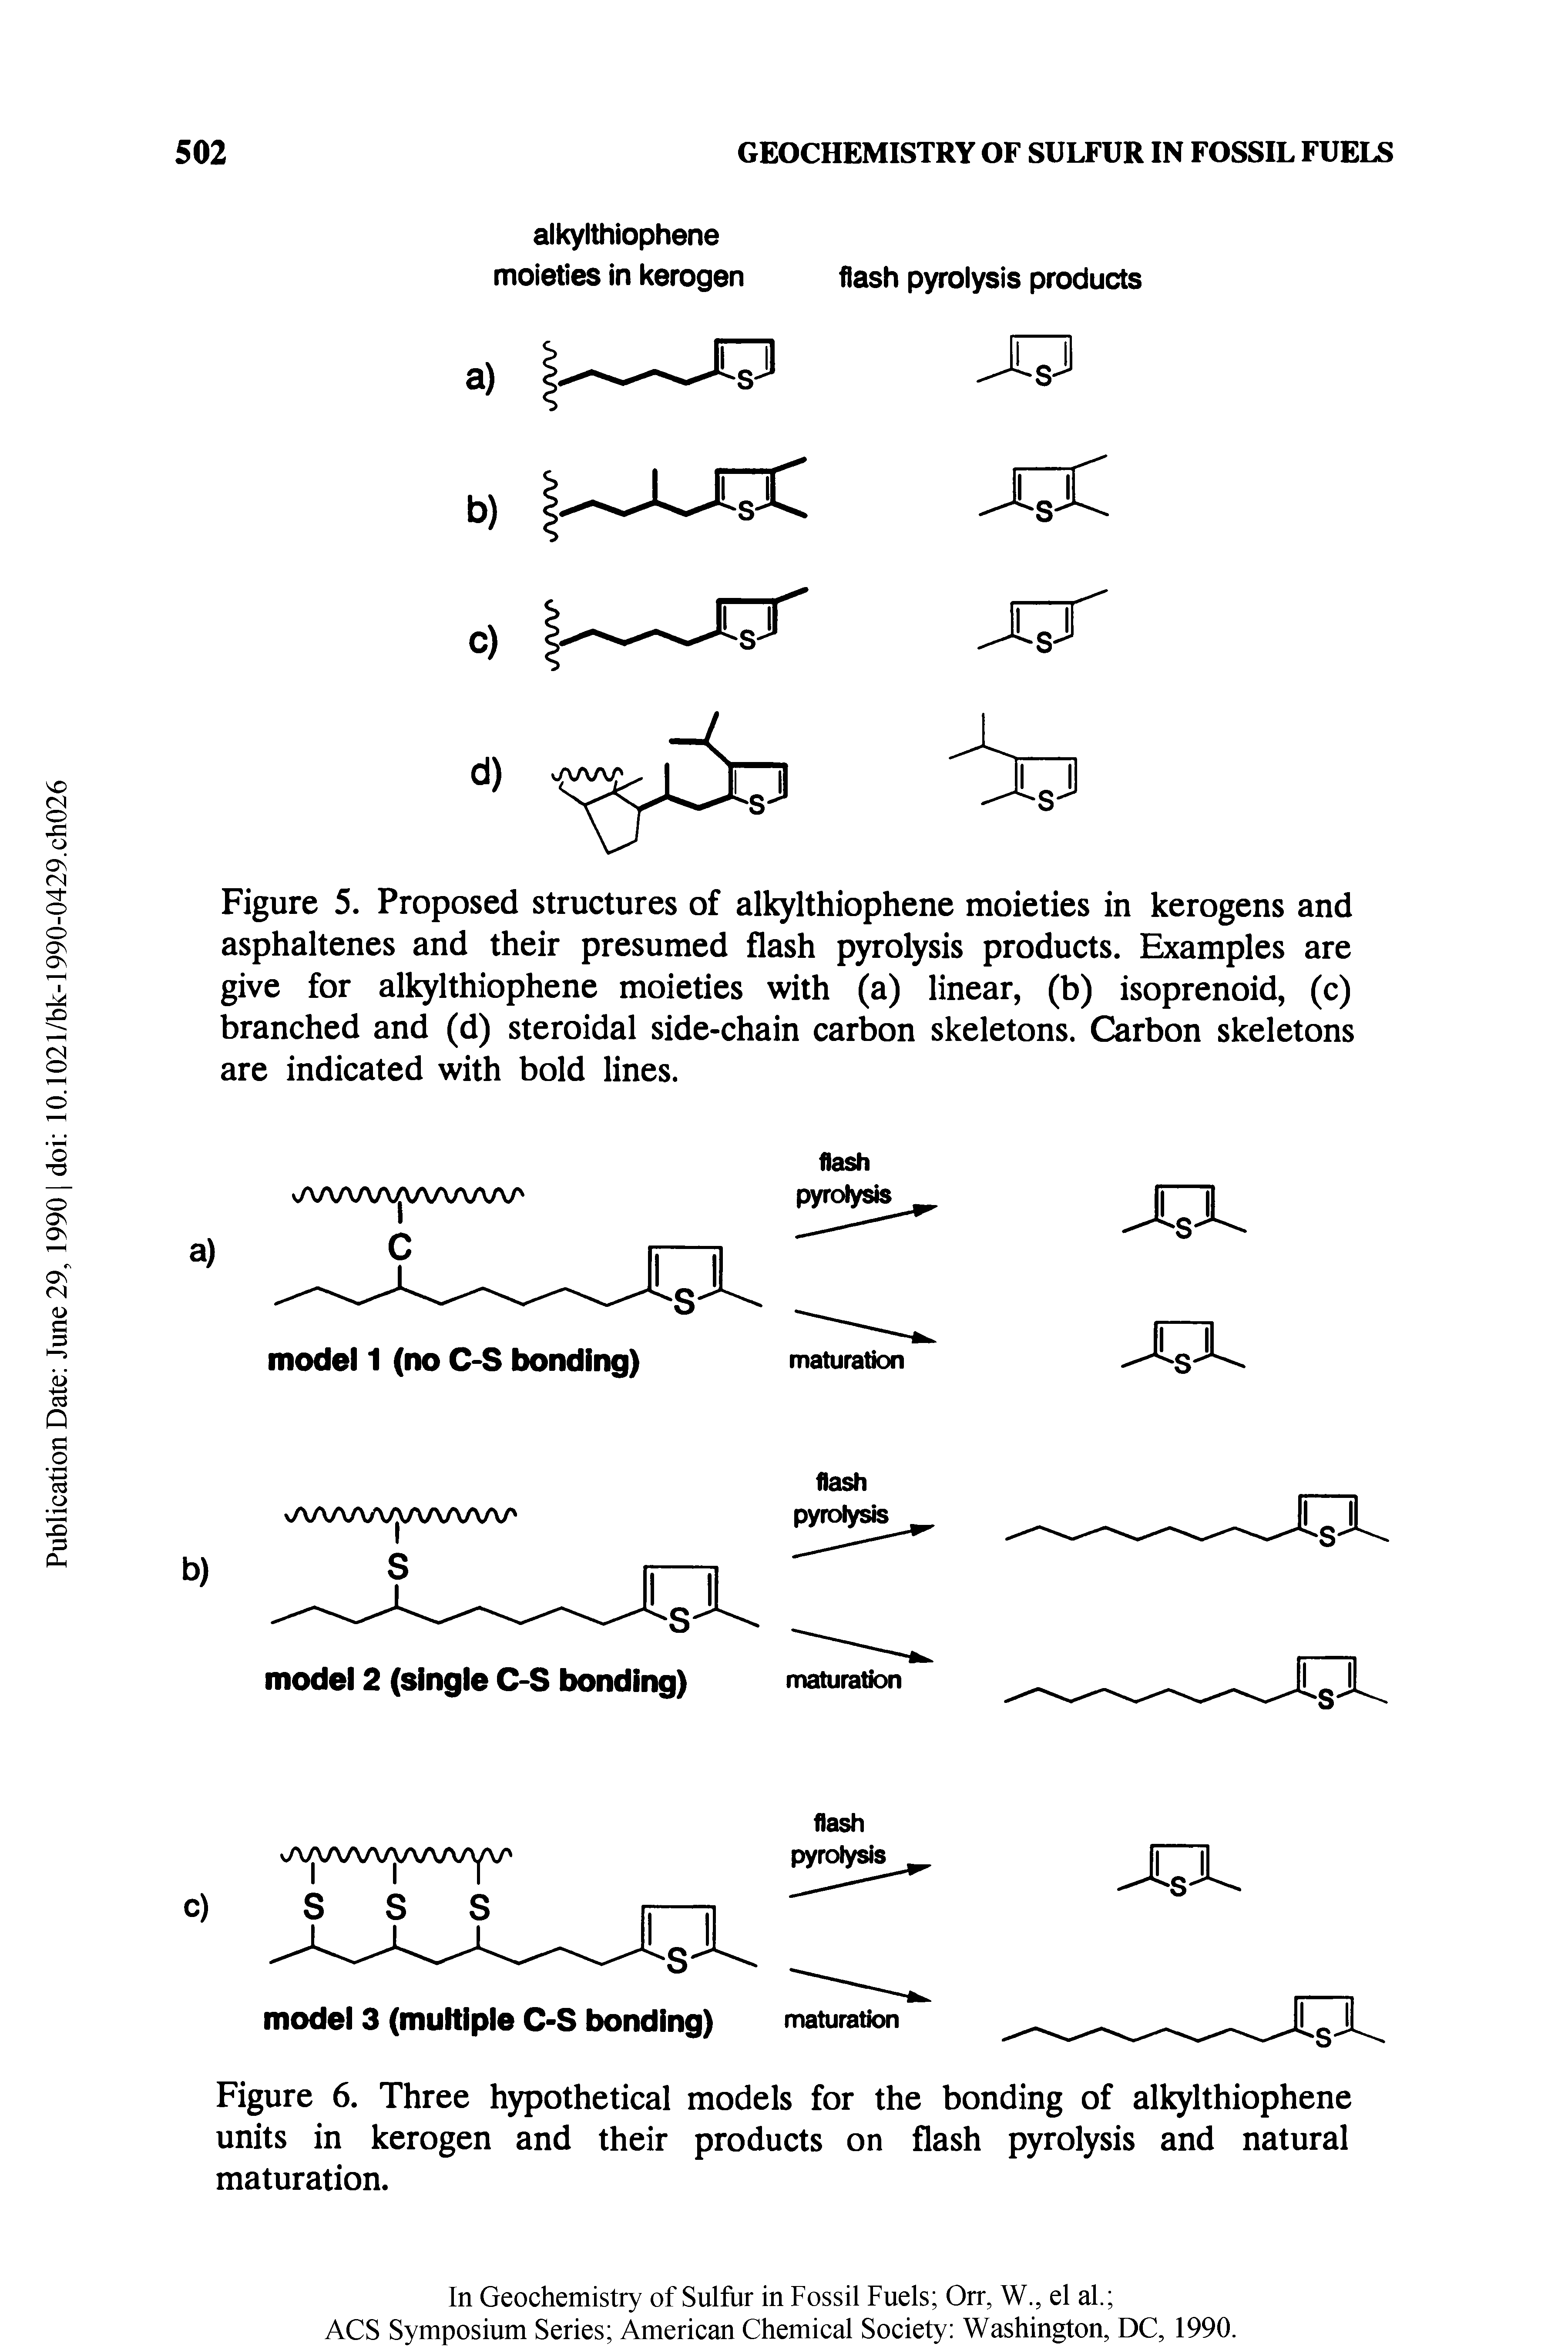 Figure 5. Proposed structures of alkylthiophene moieties in kerogens and asphaltenes and their presumed flash pyrolysis products. Examples are give for alkylthiophene moieties with (a) linear, (b) isoprenoid, (c) branched and (d) steroidal side-chain carbon skeletons. Carbon skeletons are indicated with bold lines.